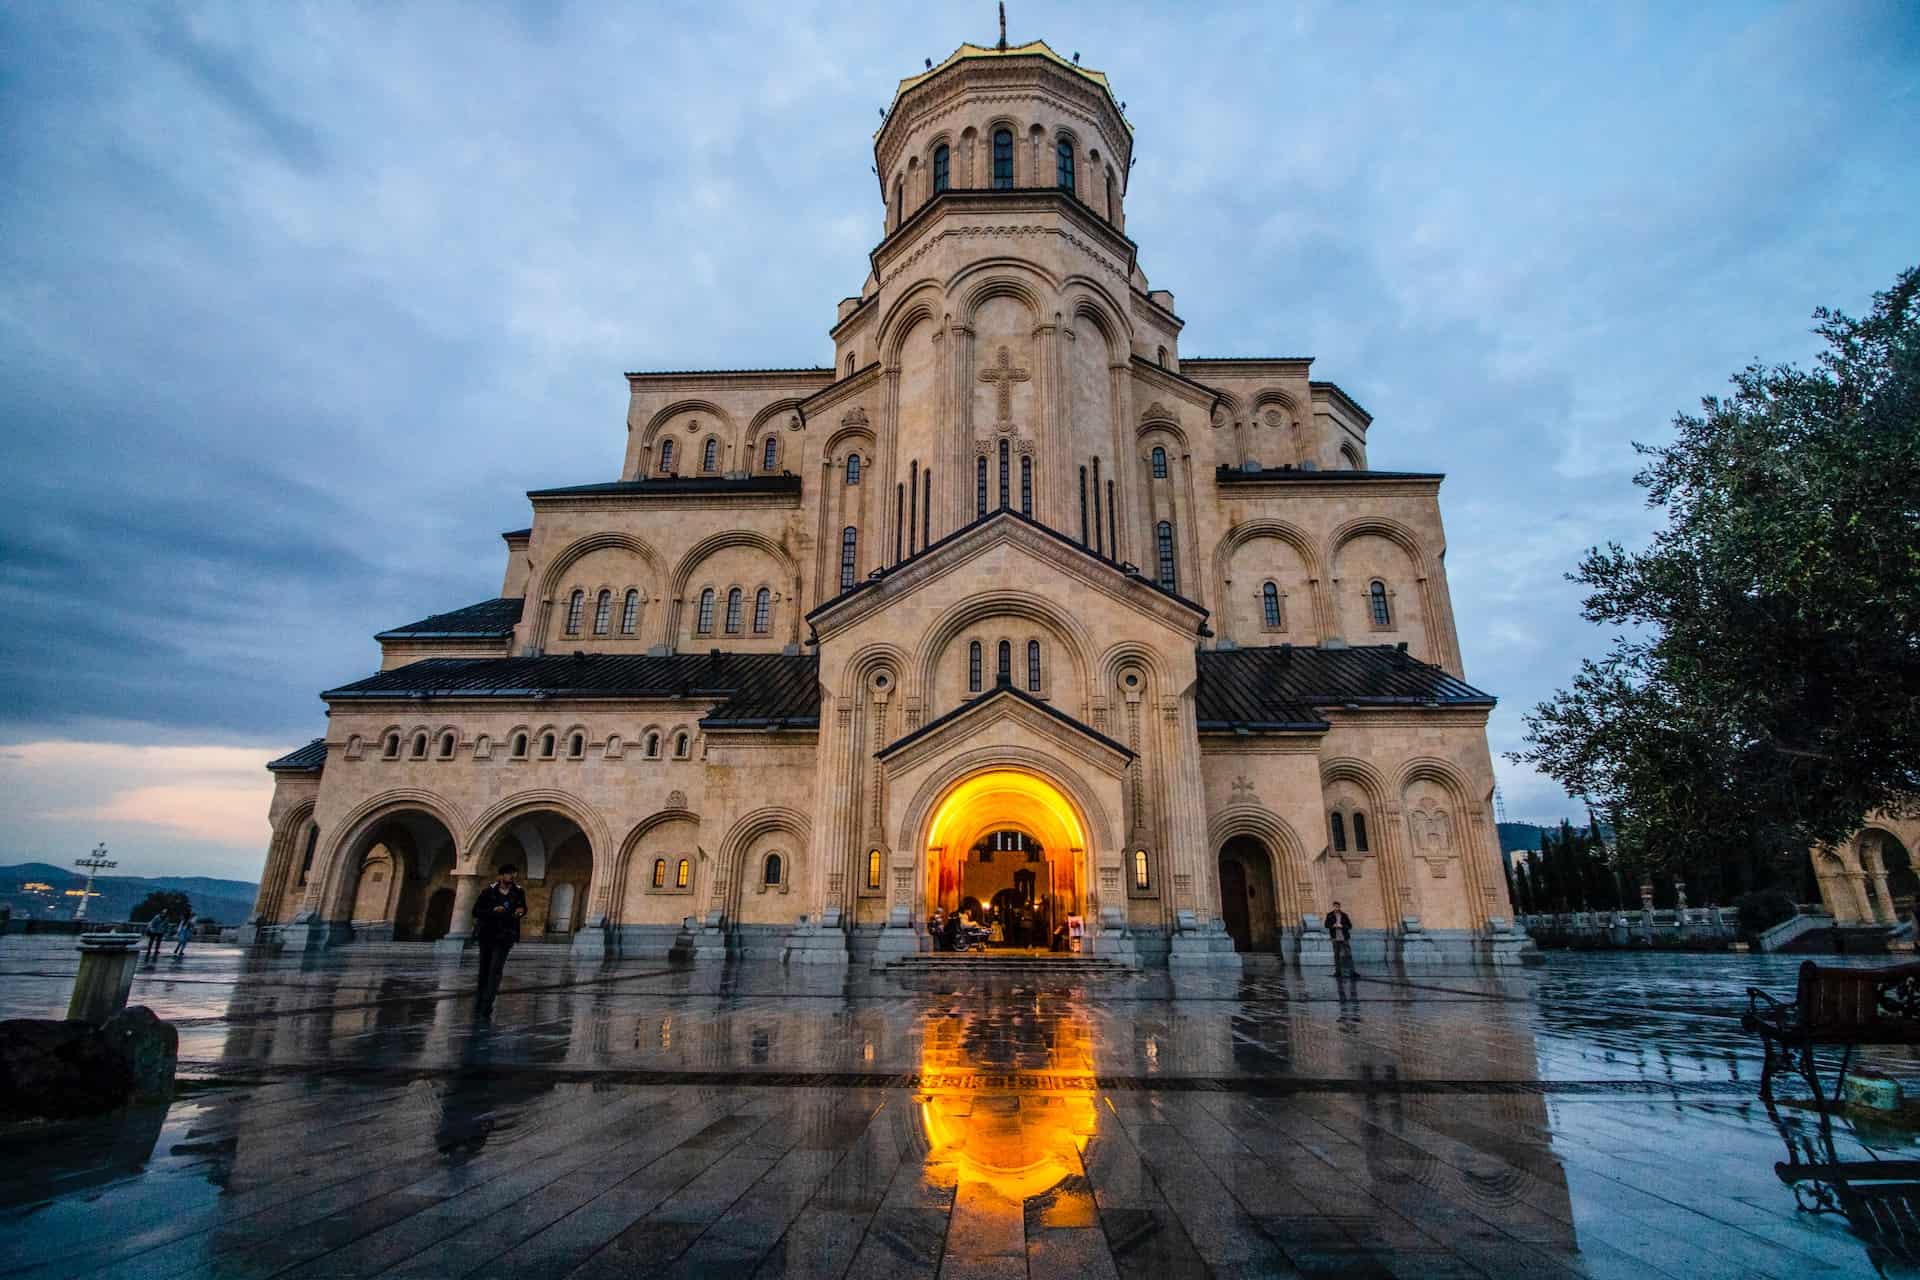 Best things to do in Tbilisi Georgia - Paul McDougal - Holy Trinity Cathedral by Mostafa Meraji on Unsplash